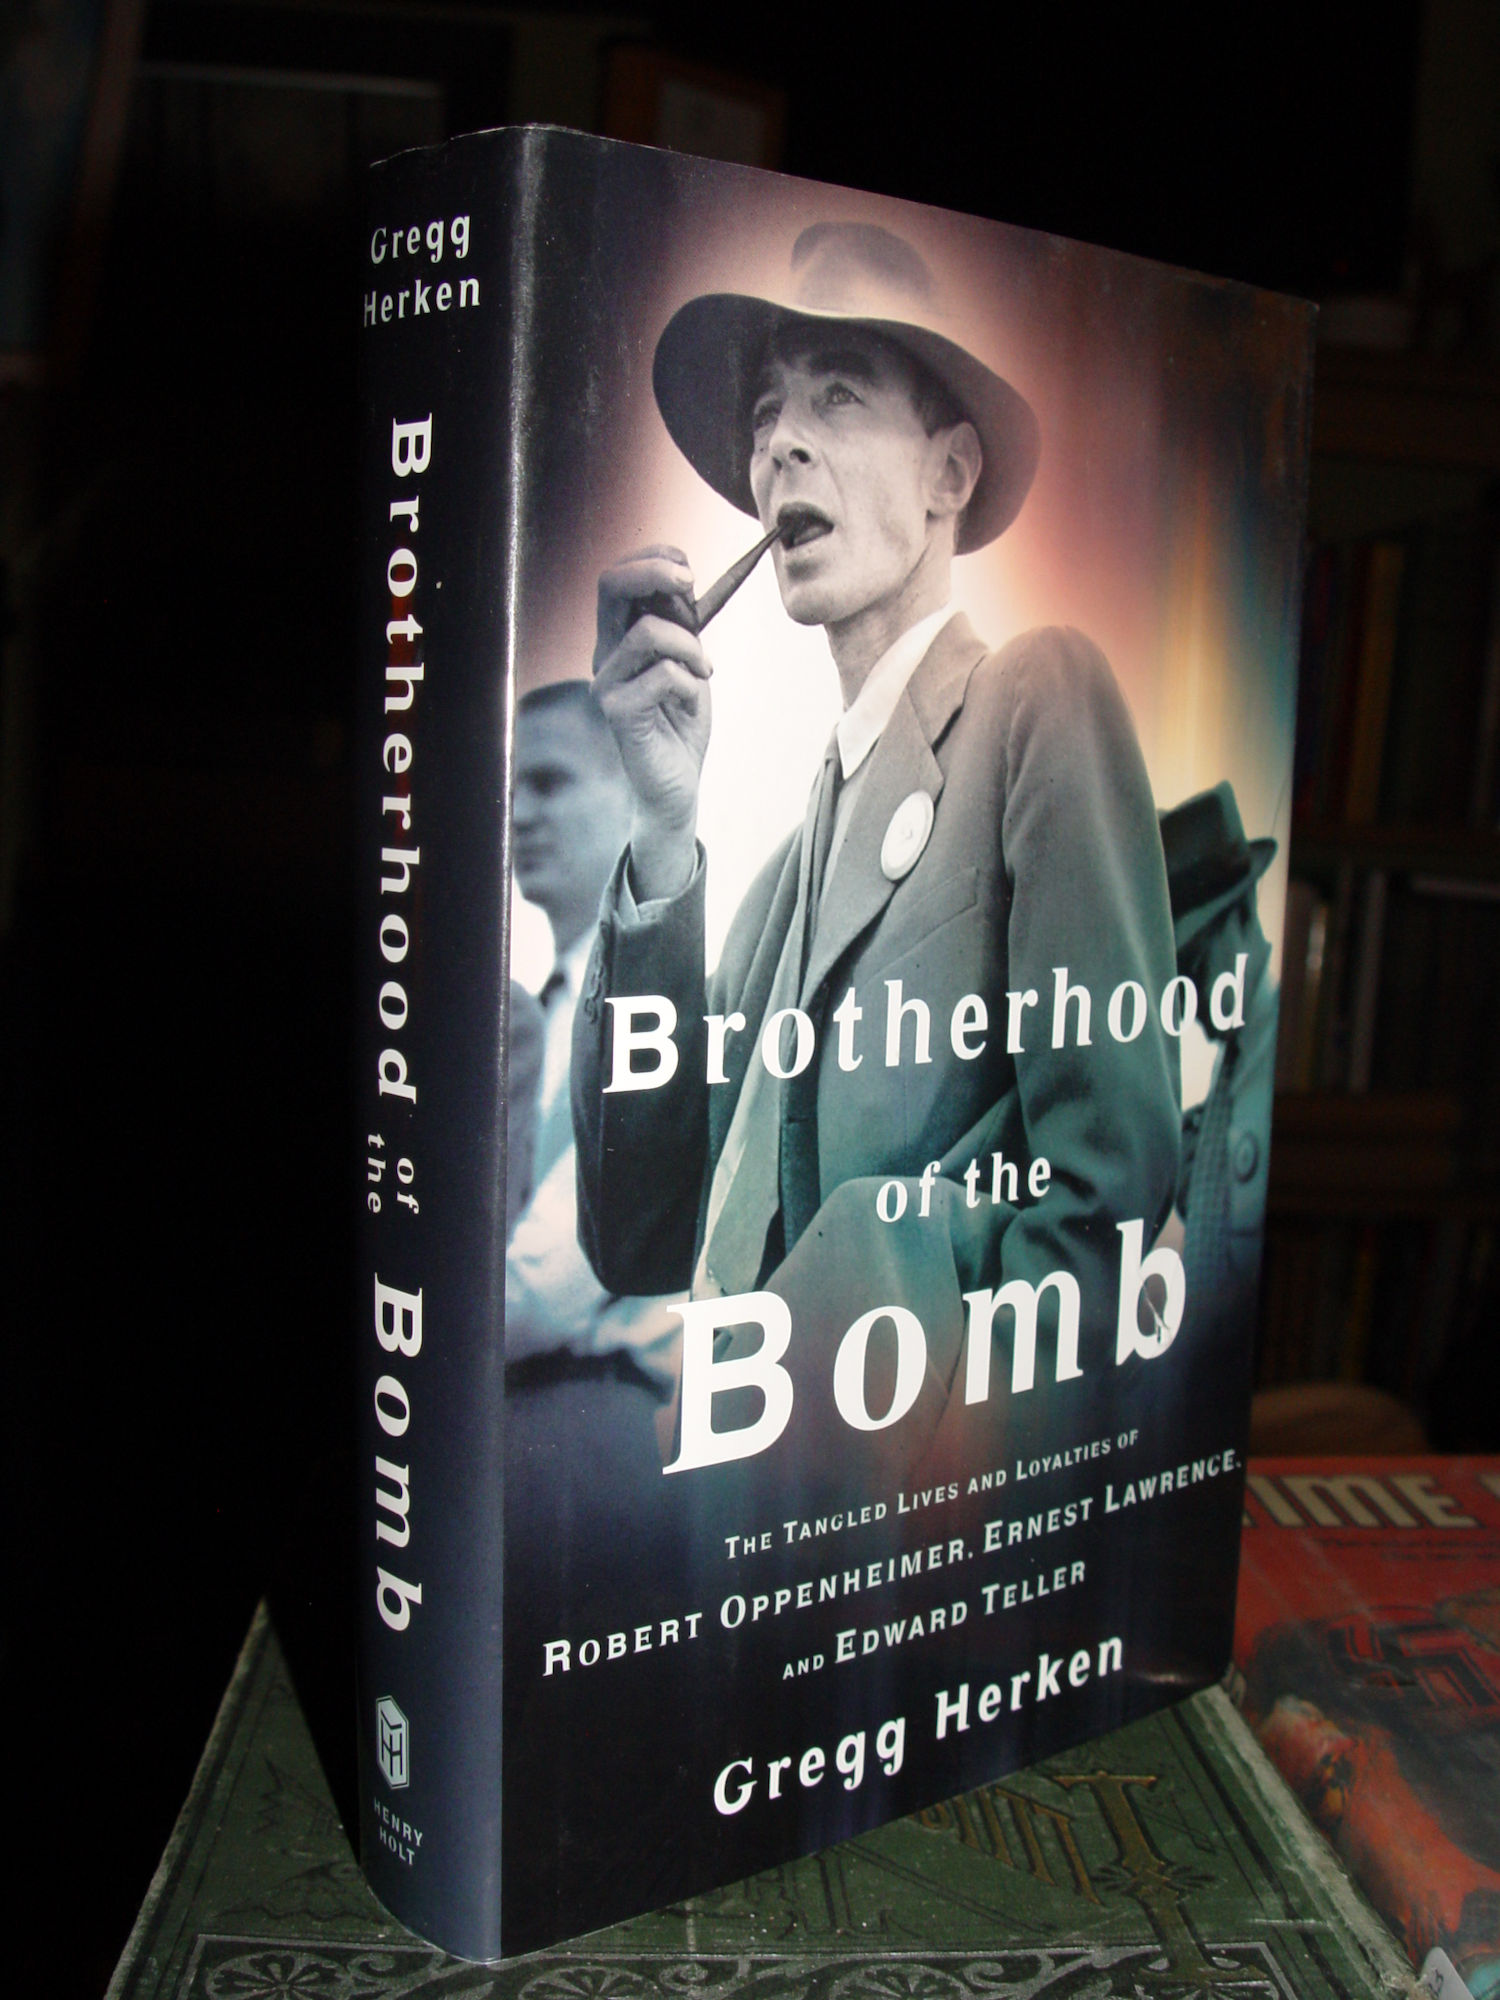 Brotherhood of the Bomb: The Tangled Lives
                        and Loyalties of Robert Oppenheimer, Ernest
                        Lawrence and Edward Teller 2002